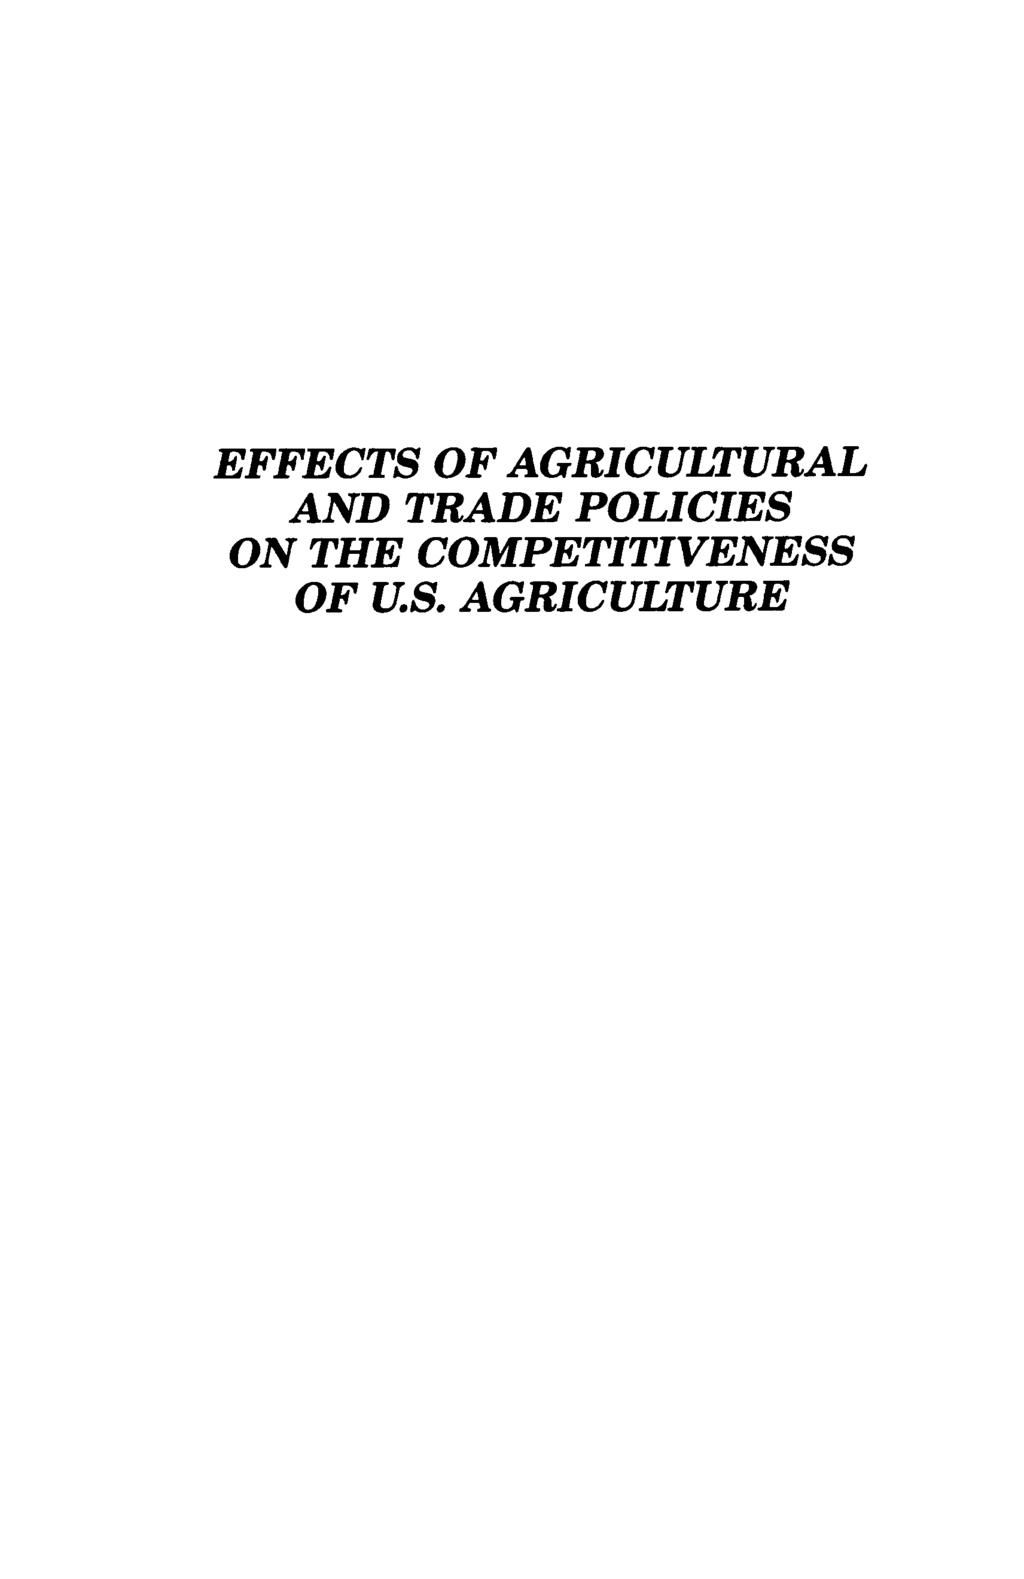 EFFECTS OF AGRICULTURAL AND TRADE POLICIES